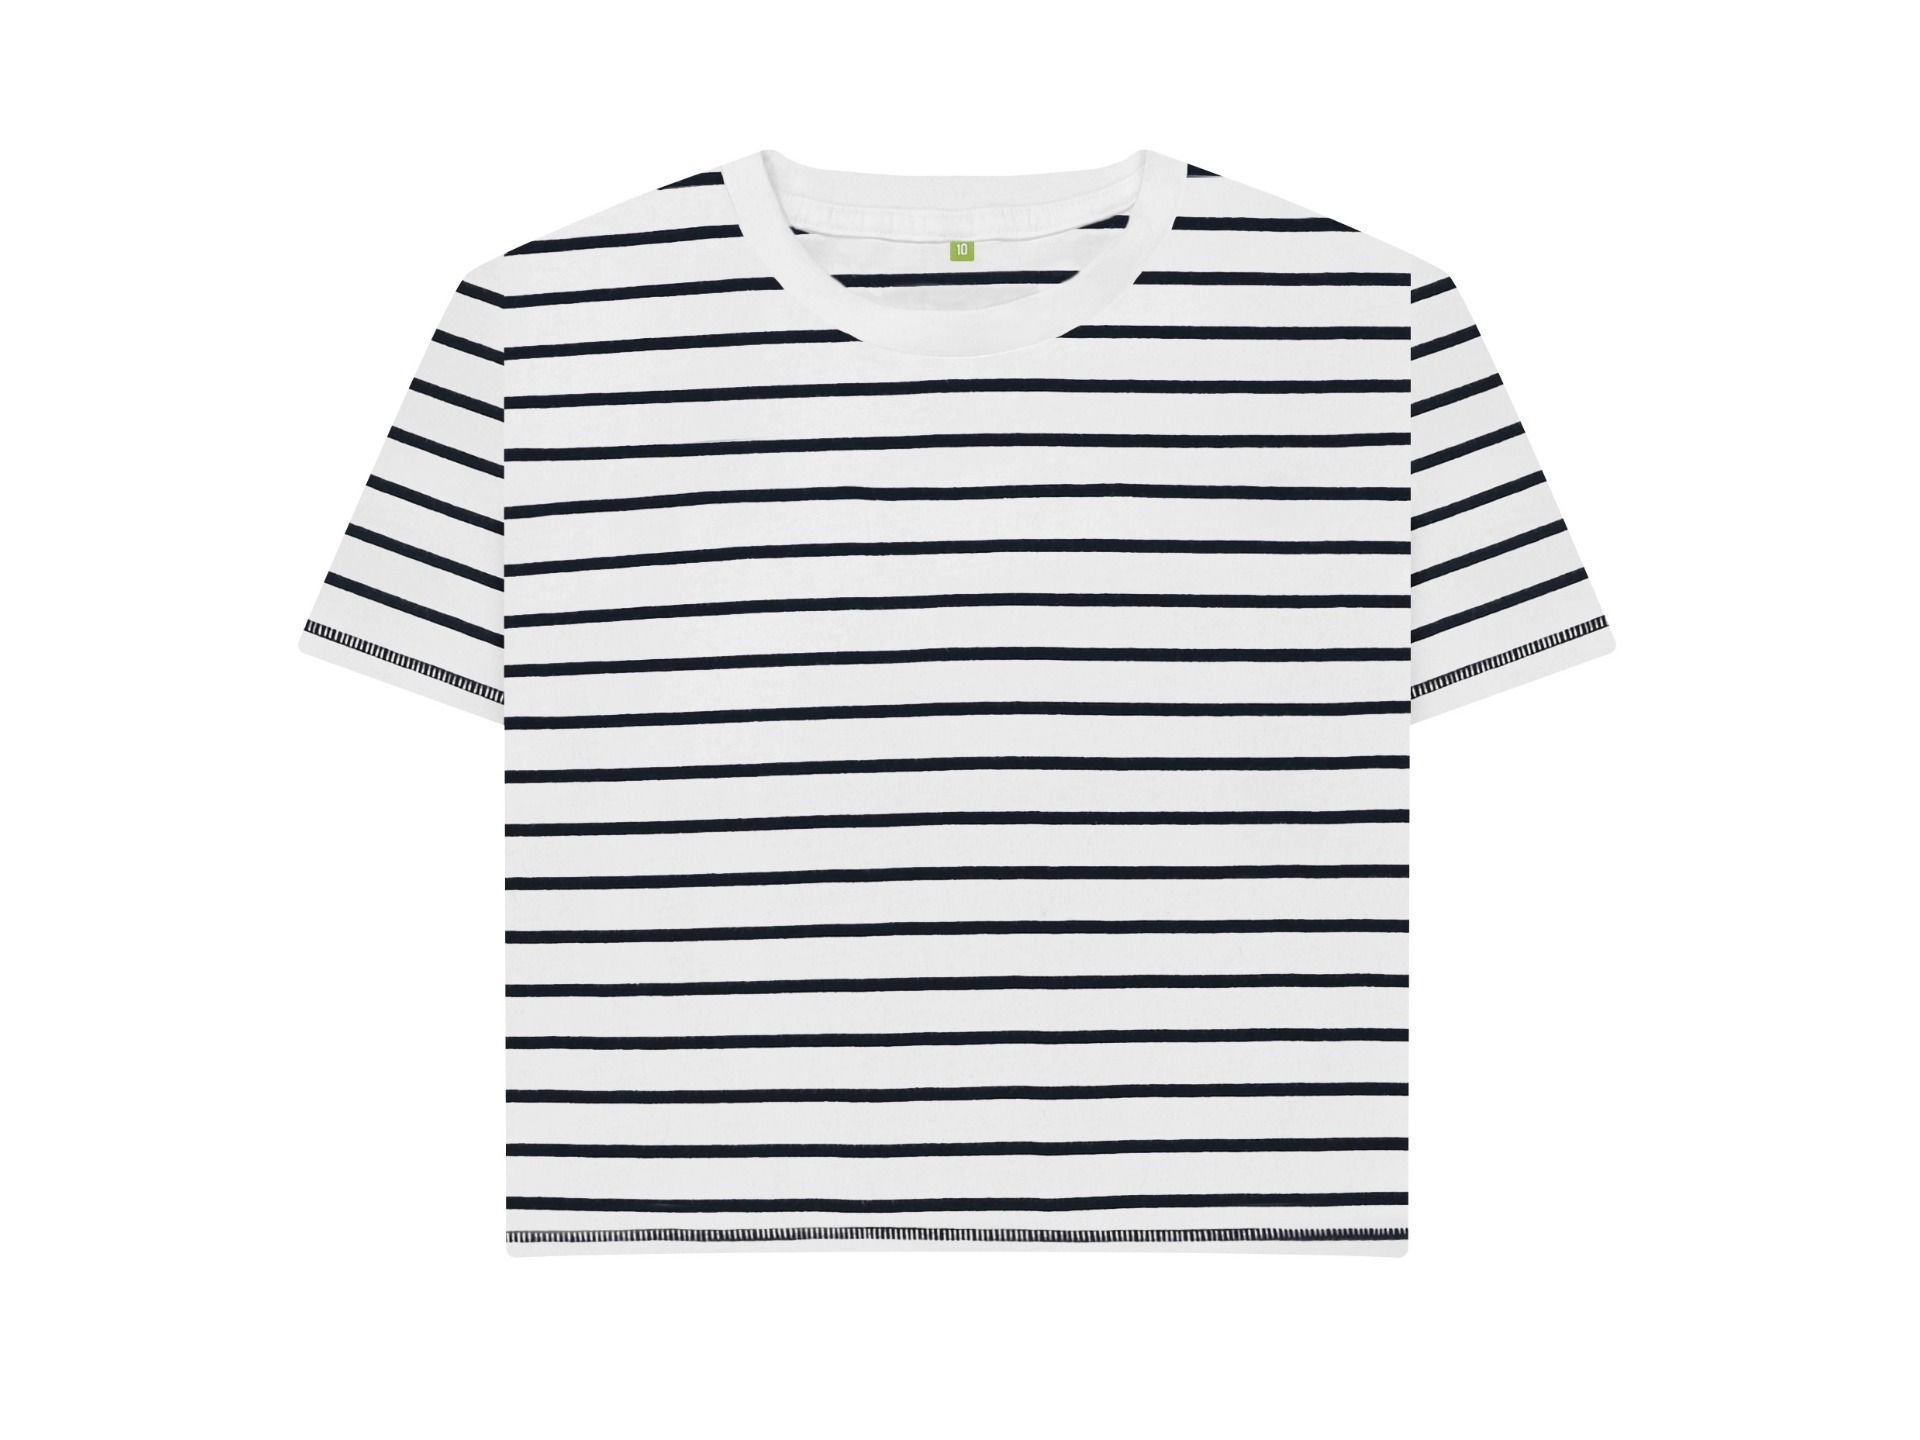 How to find the perfect Breton top